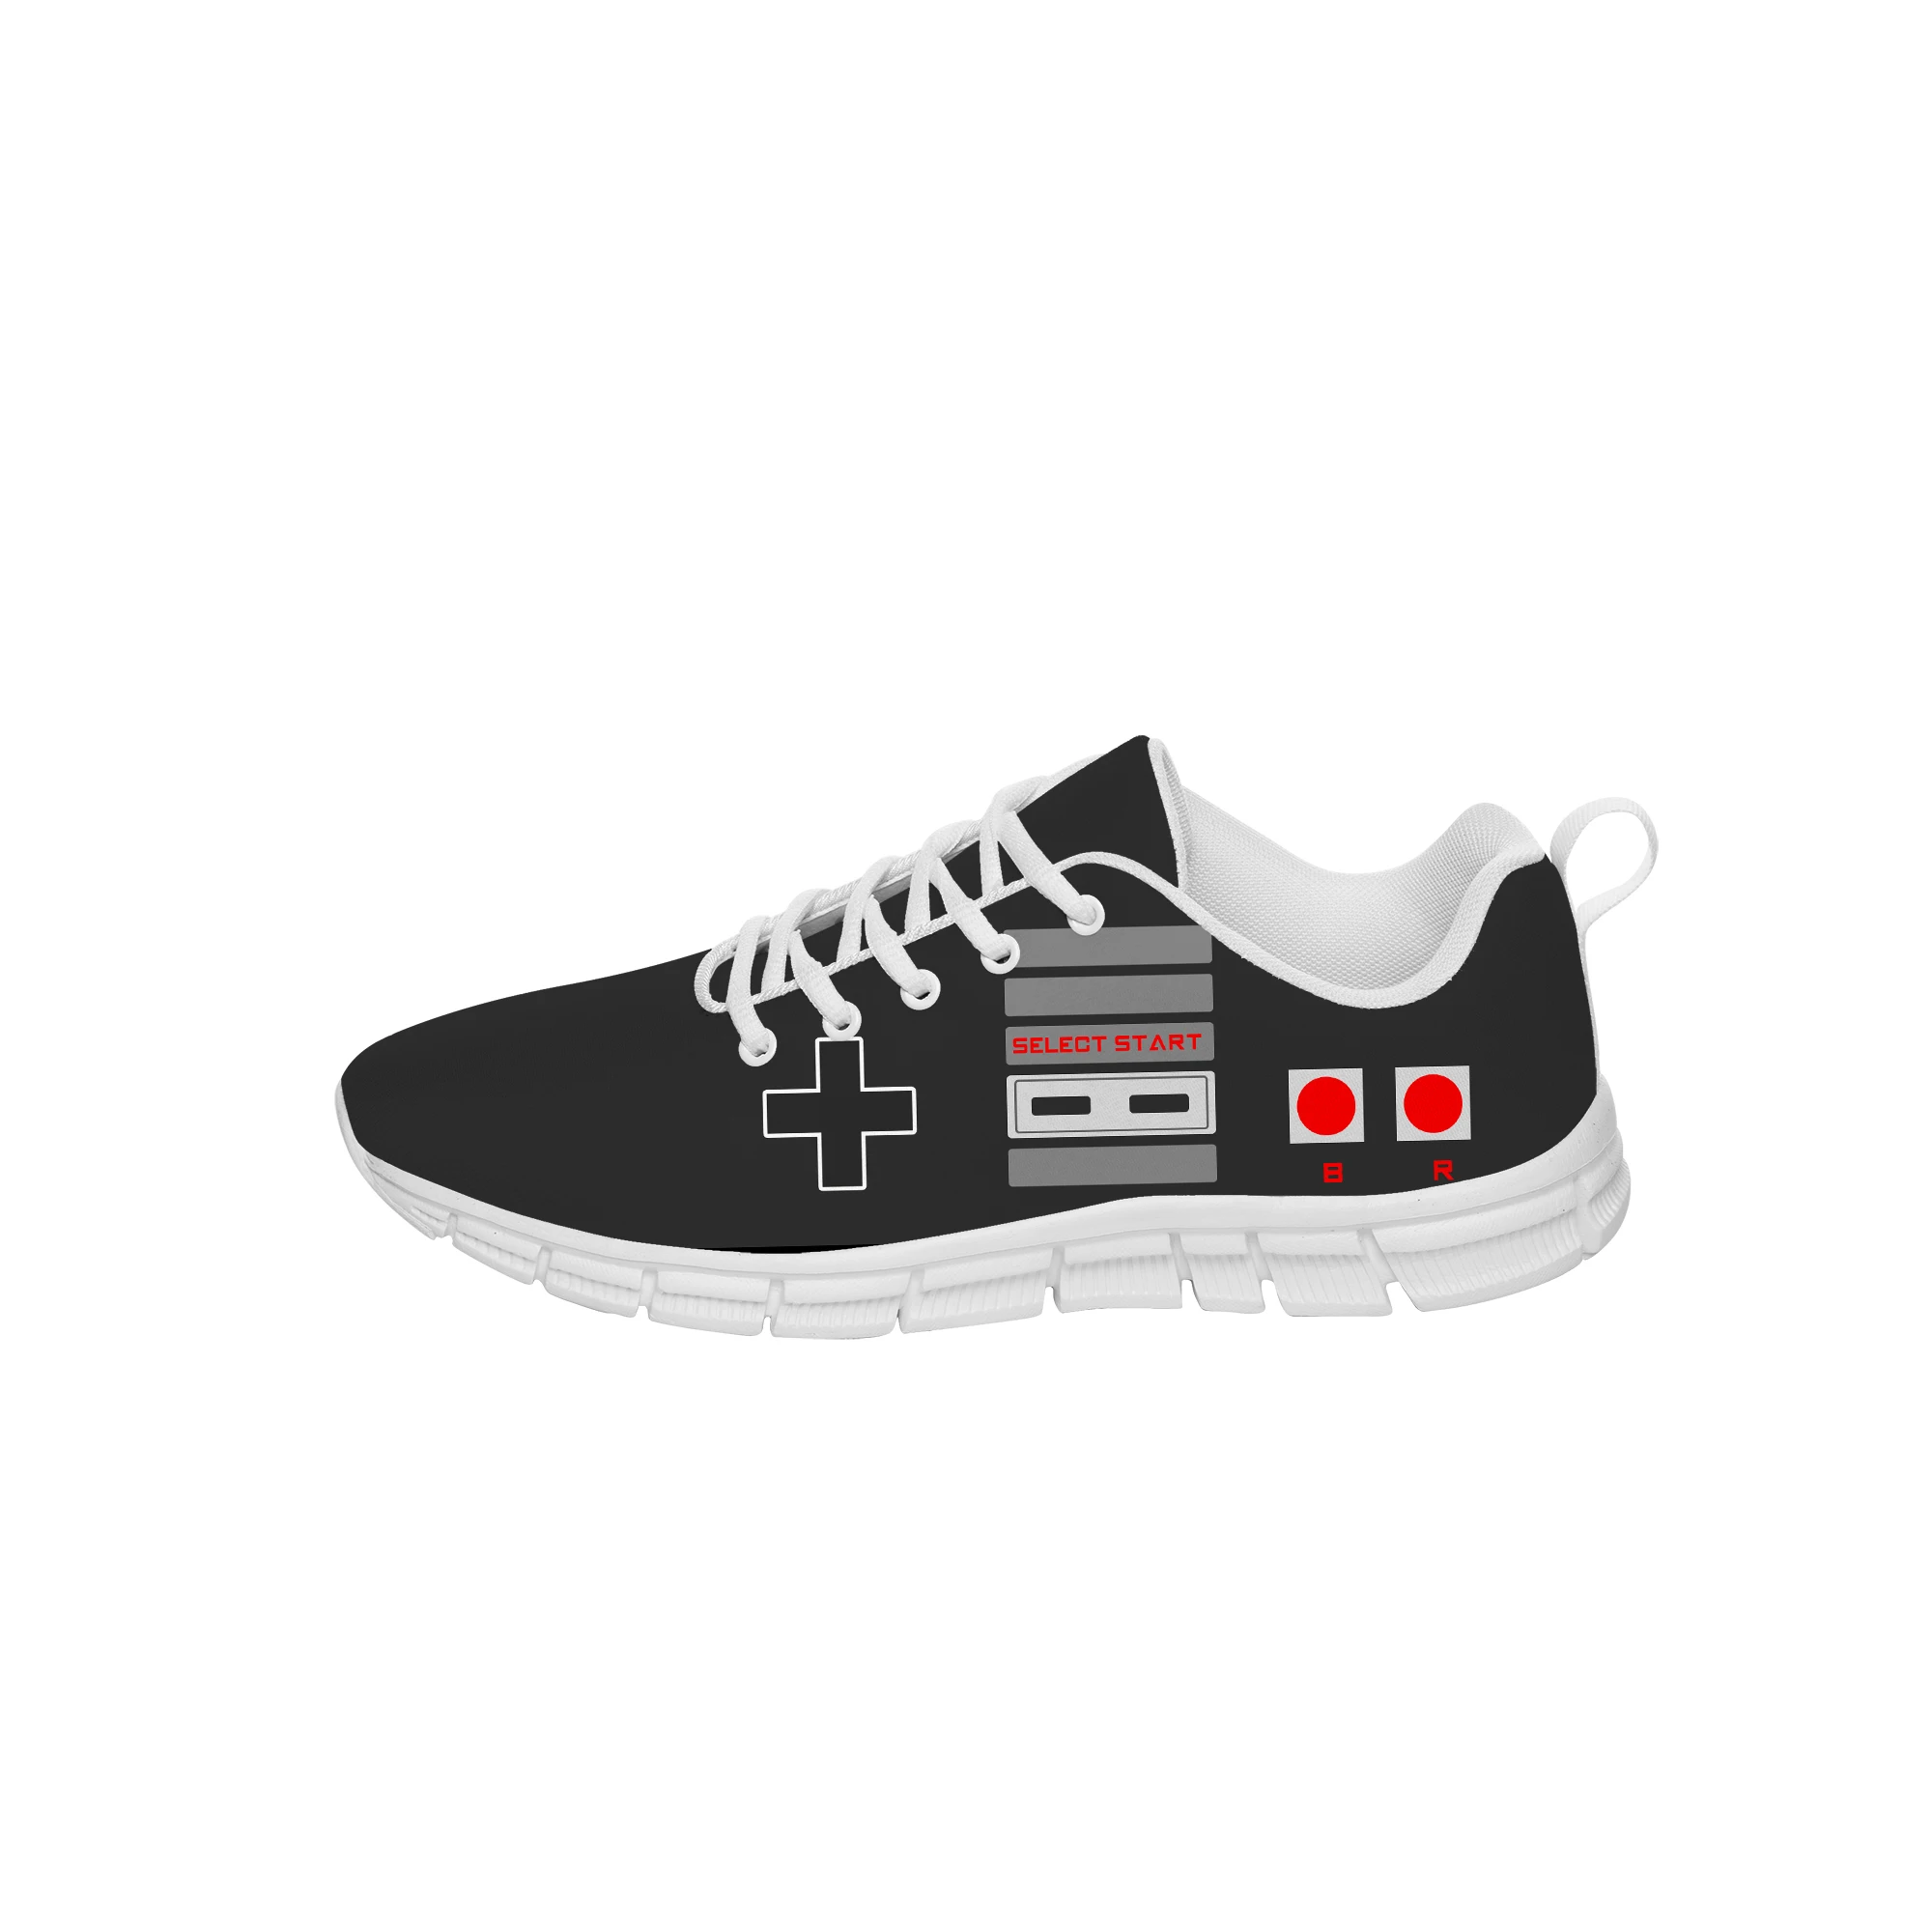 Nintendo Nes Controller Sneakers Mens Womens Teenager Casual Cloth Shoes Canvas Running Shoes 3D Print Lightweight shoe mens womens jogging shoes couples athletics marathon running sneakers lightweight gym luminous casual shoes